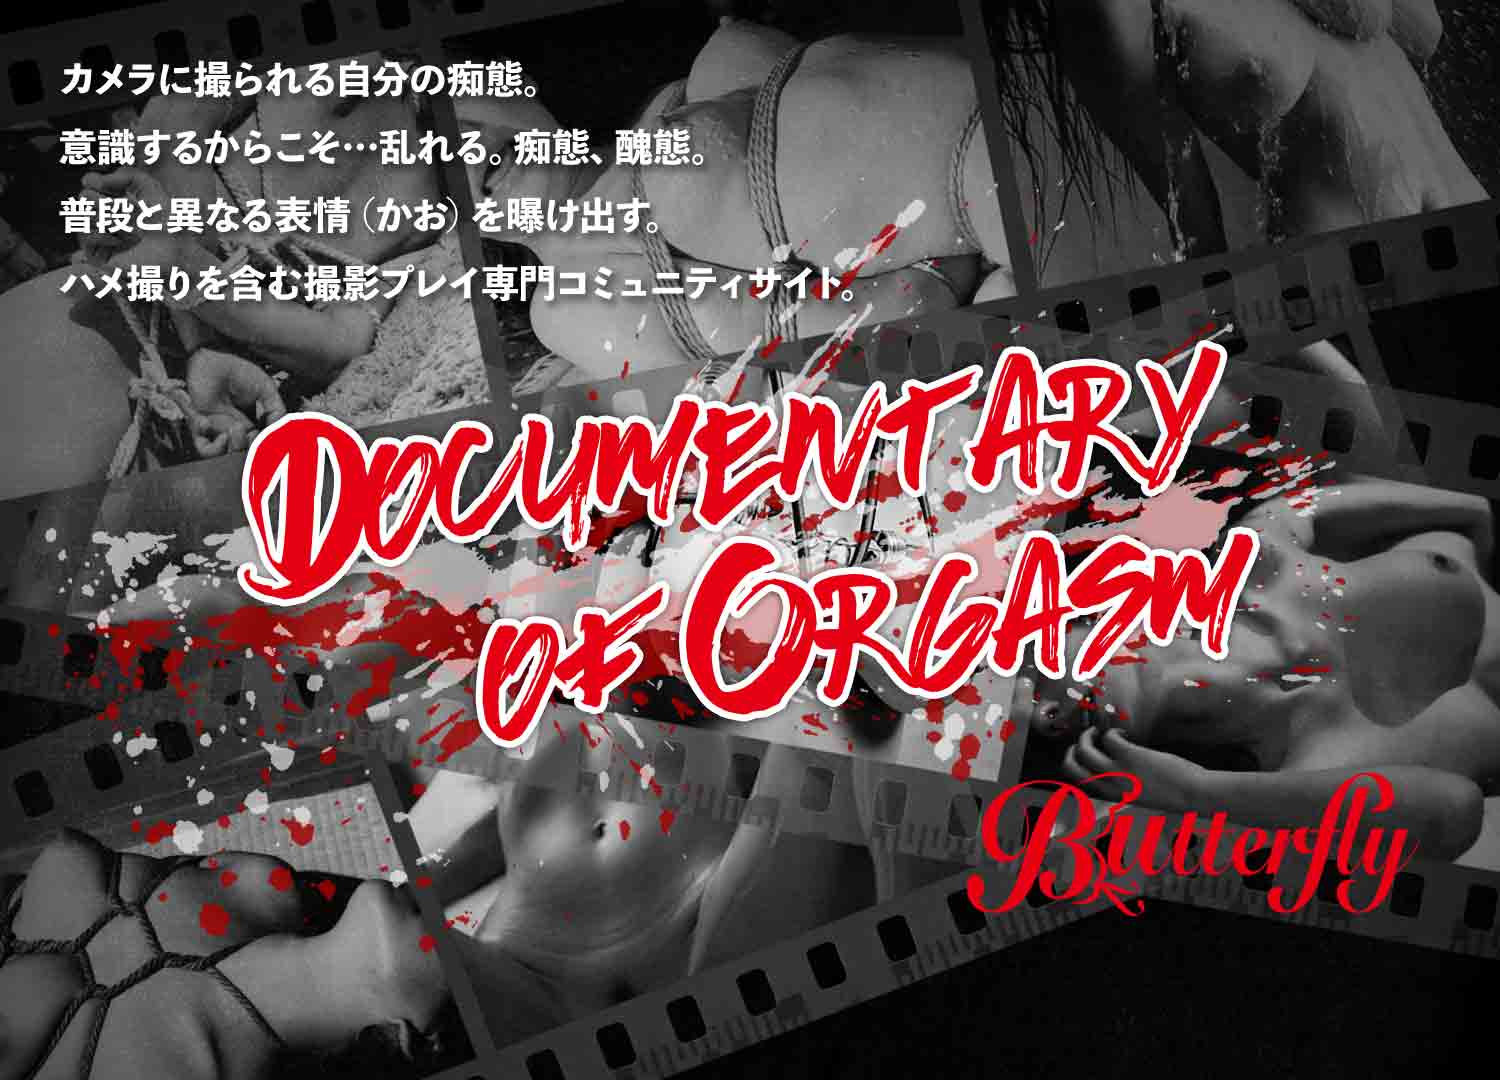 Butterfly - Documentary of Orgasm